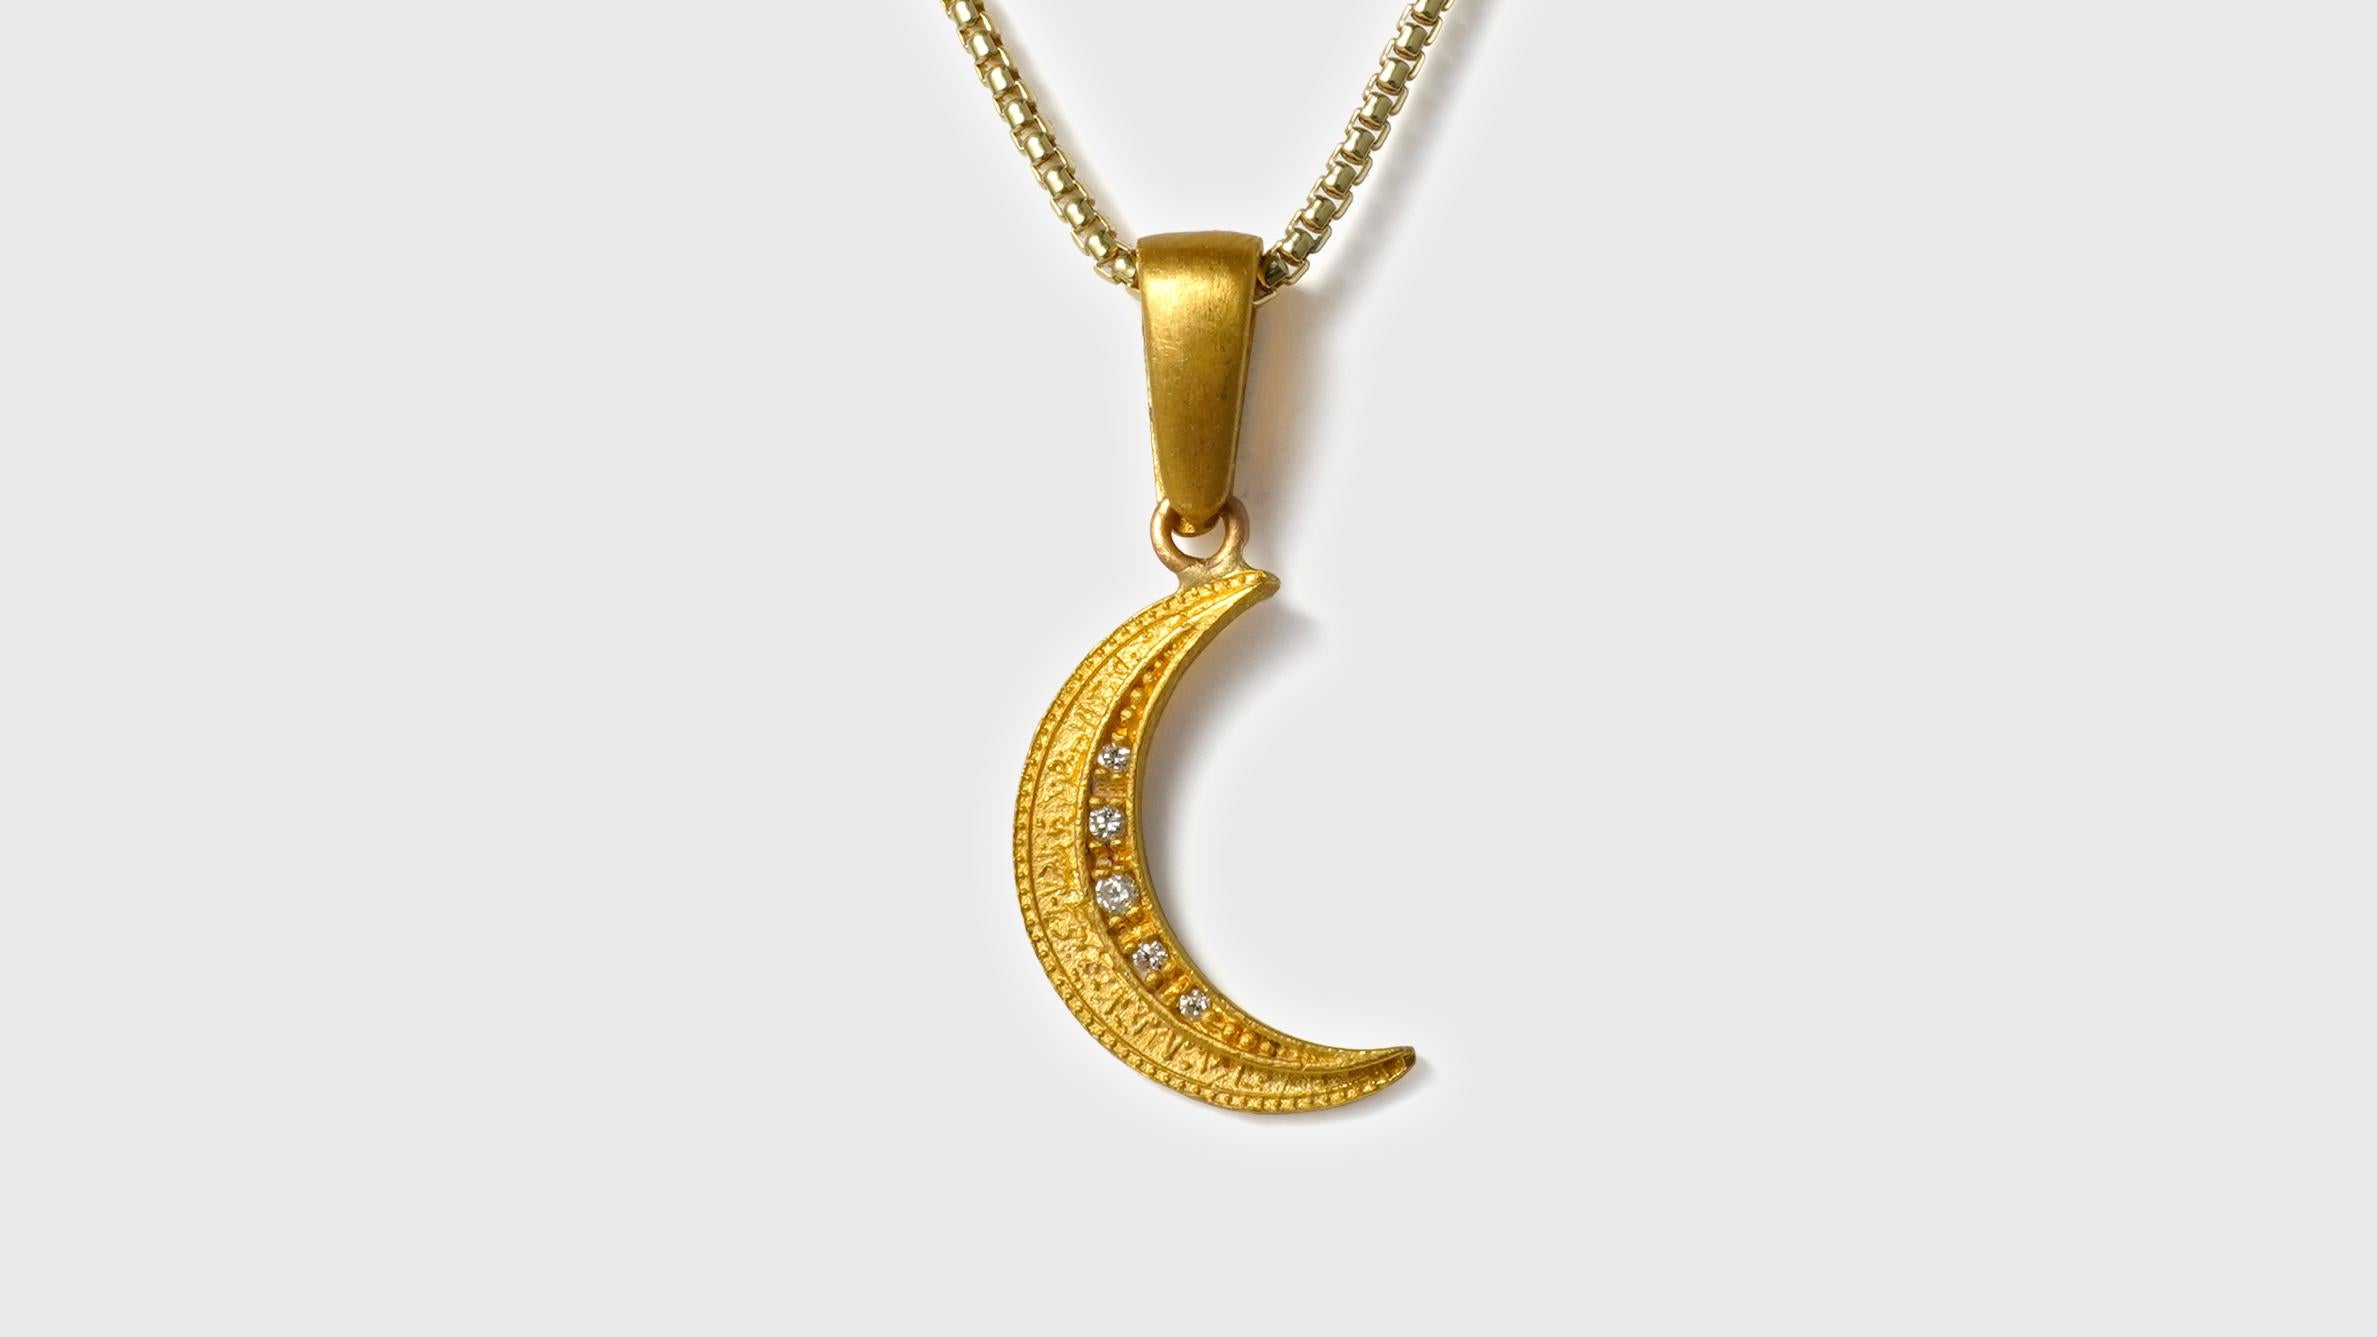 Moon Charm, 24K Solid Yellow Gold Moon, Waxing or Waning, Pendant-Charm with Diamonds

Size - Small Charm (Looks great paired and layered with other charm pendants.)
6 Diamonds - 0.04cts
24kt Gold - 1.62 grams

THE STORY

The crescent moon has been